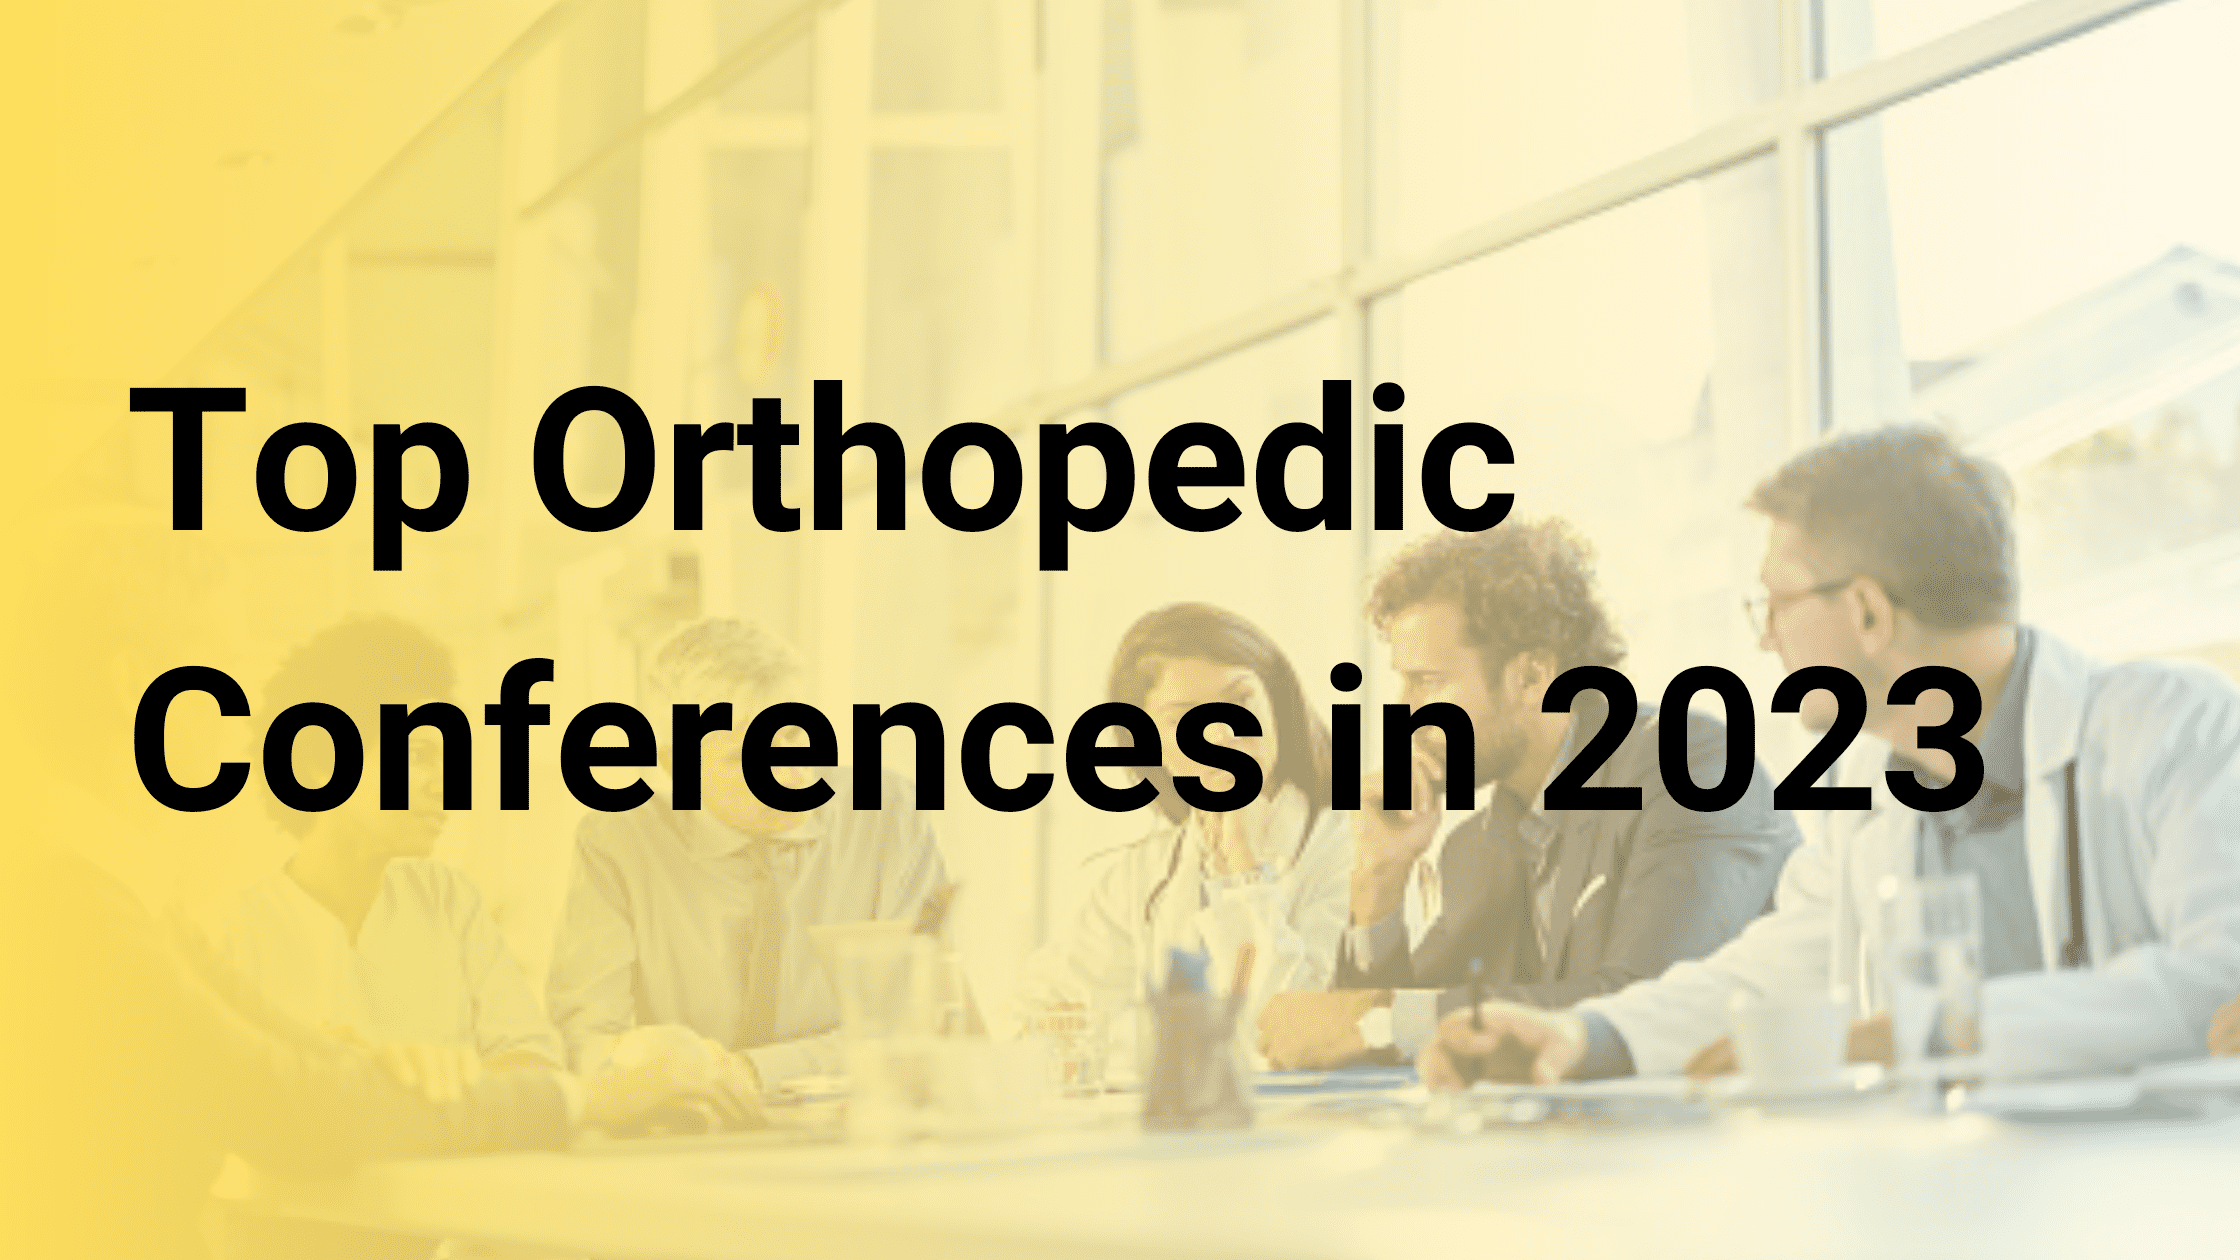 Top Orthopedic Conferences In 2023 1 